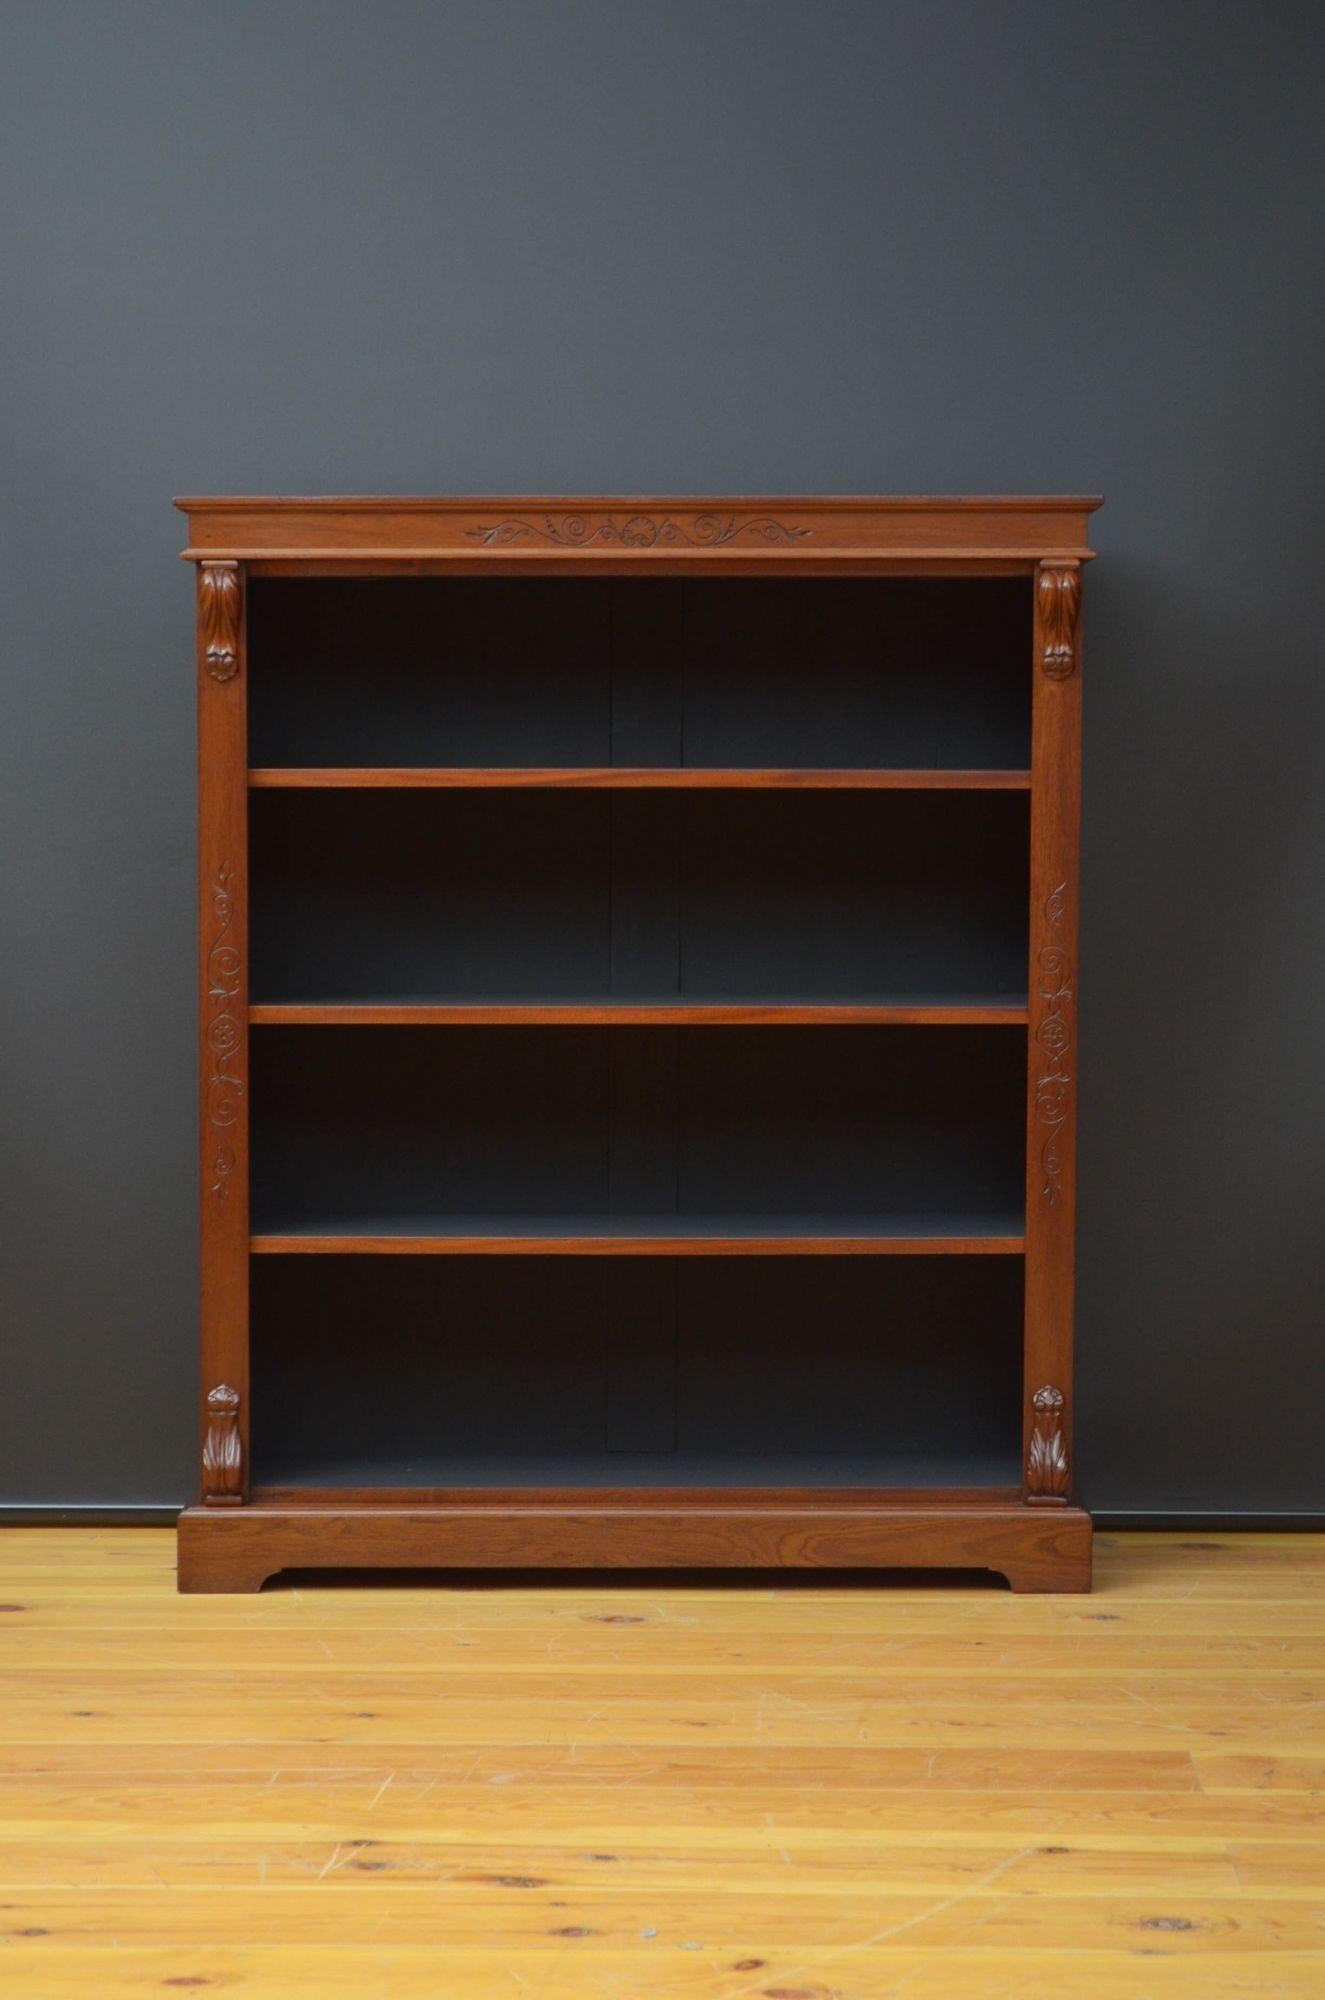 Sn5284 Victorian open bookcase in mahogany, having figured top above a decorative frieze and three height adjustable shelves, all flanked by drop carvings to the top and base, standing on shaped plinth. This antique bookcase has been sympathetically